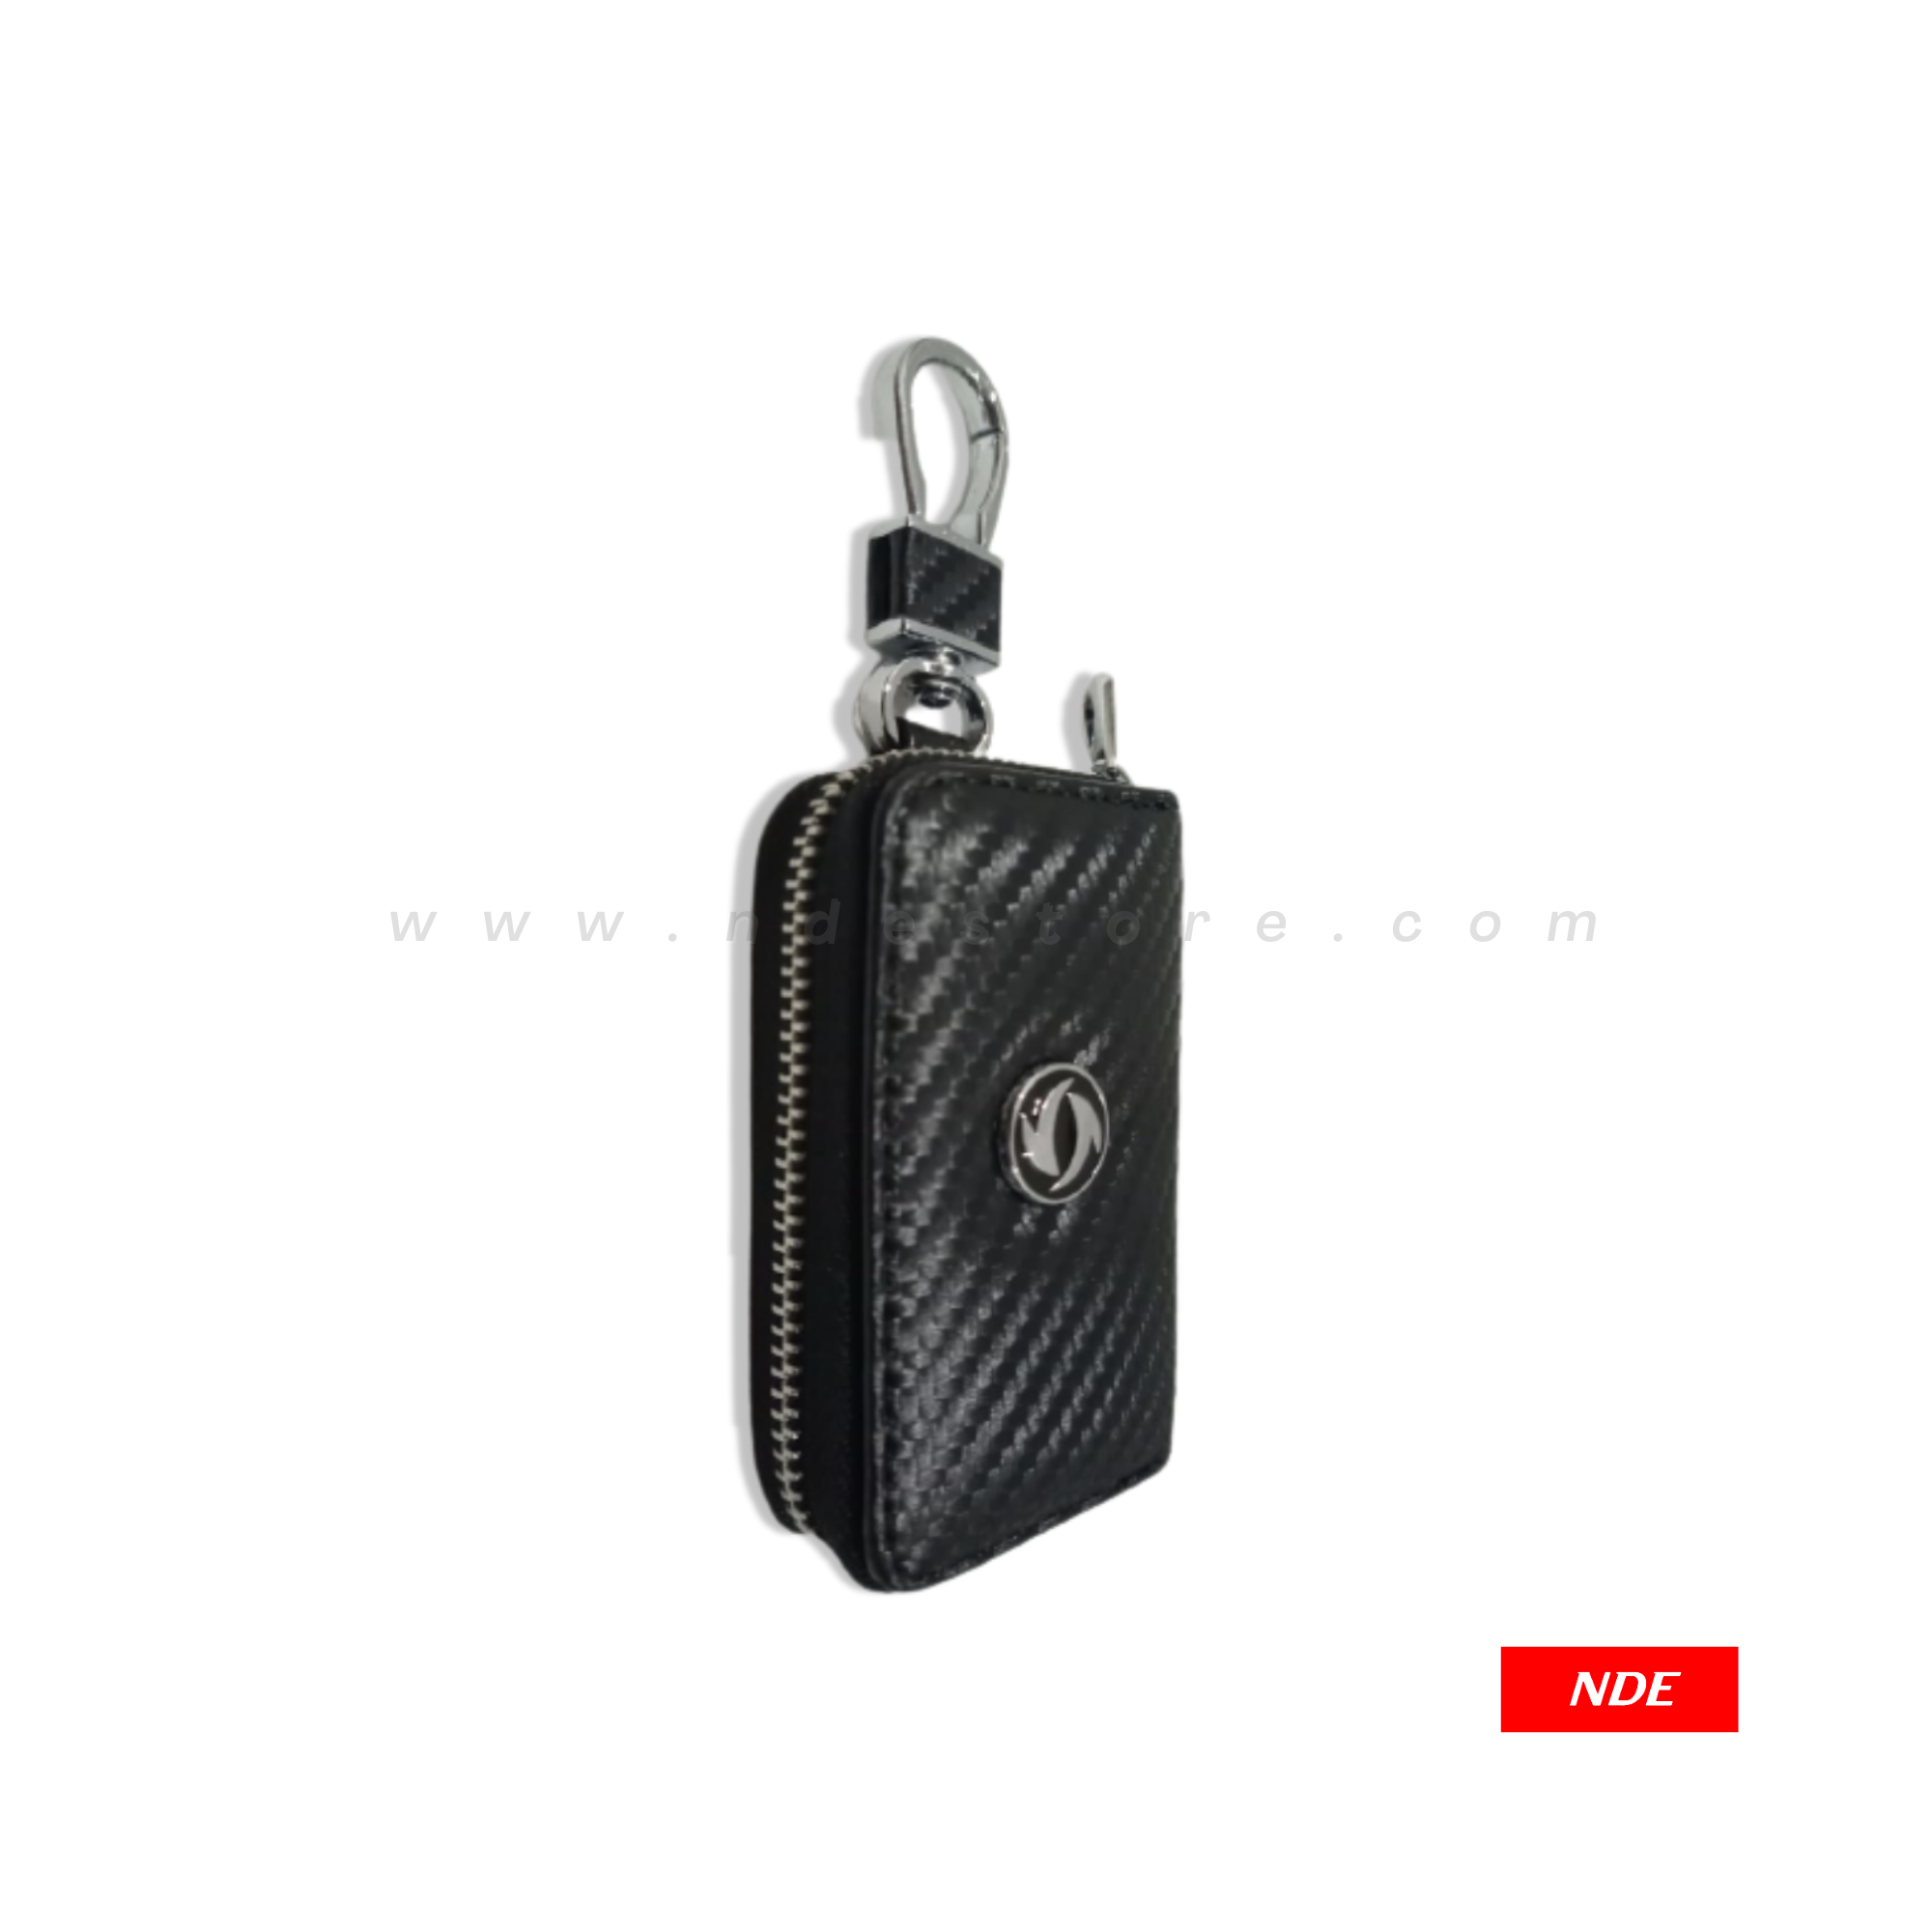 KEY CHAIN POUCH WITH DFSK LOGO